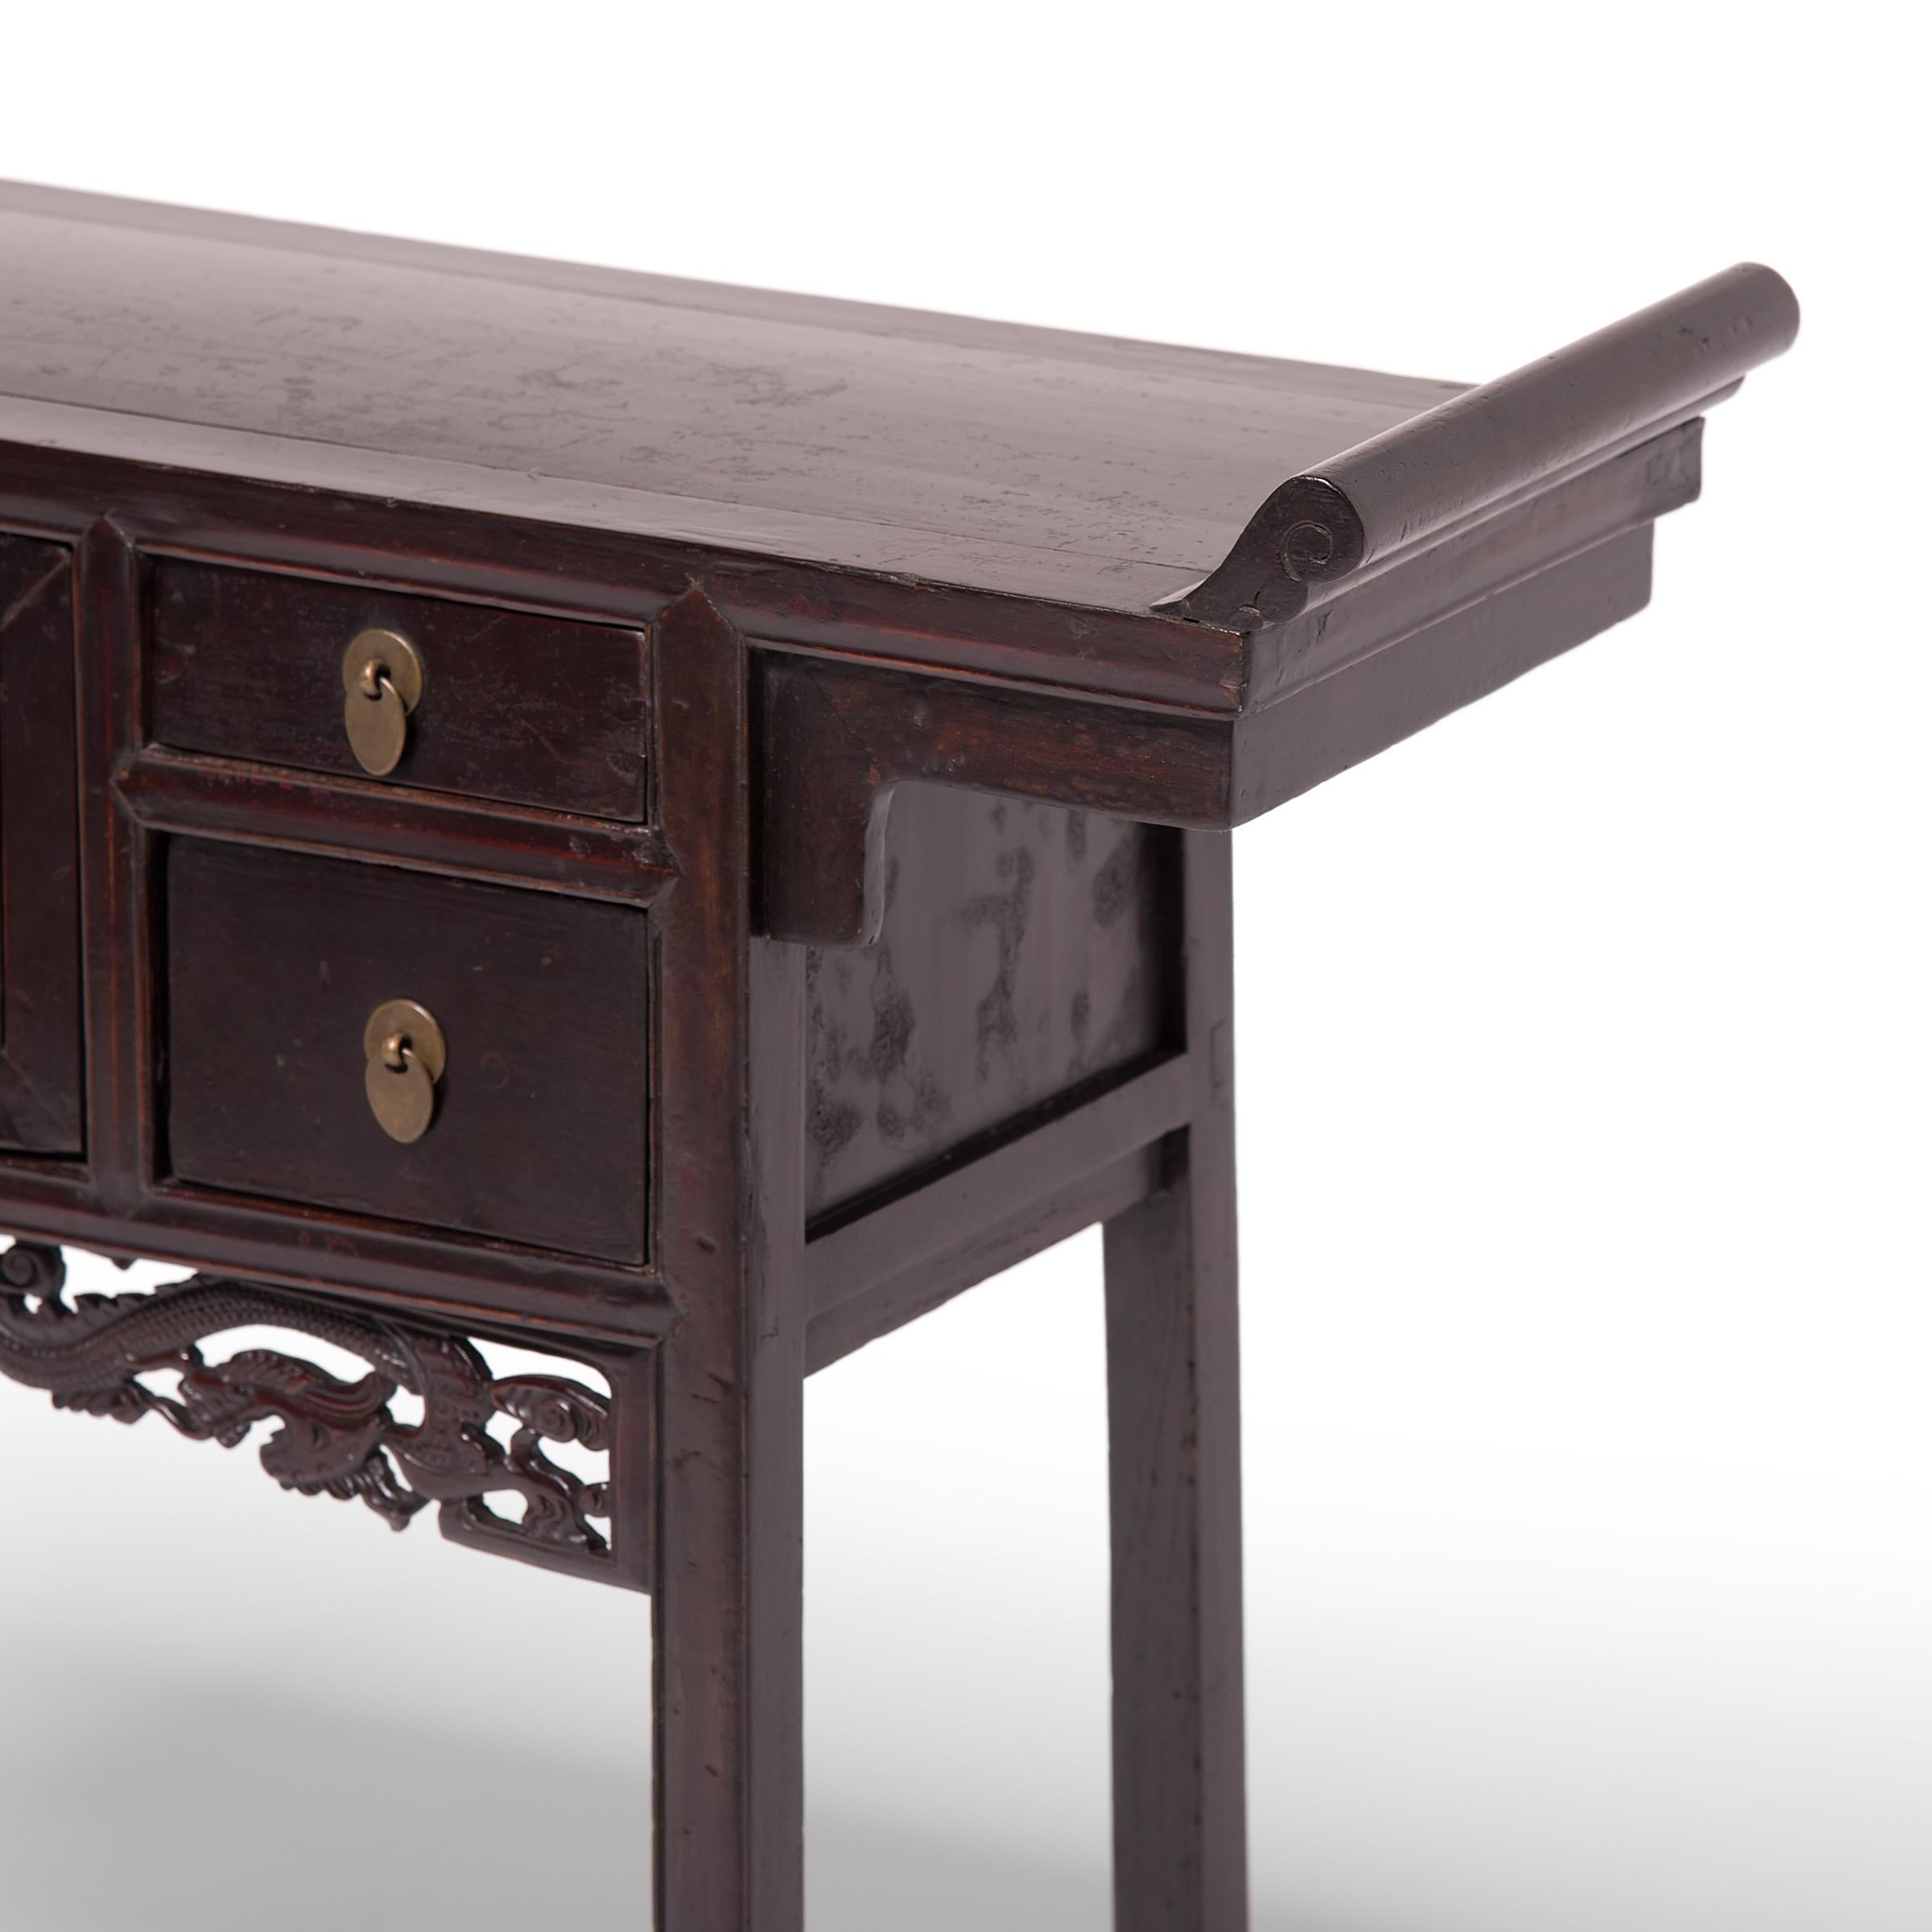 20th Century Petite Console Table with Dancing Dragon Apron